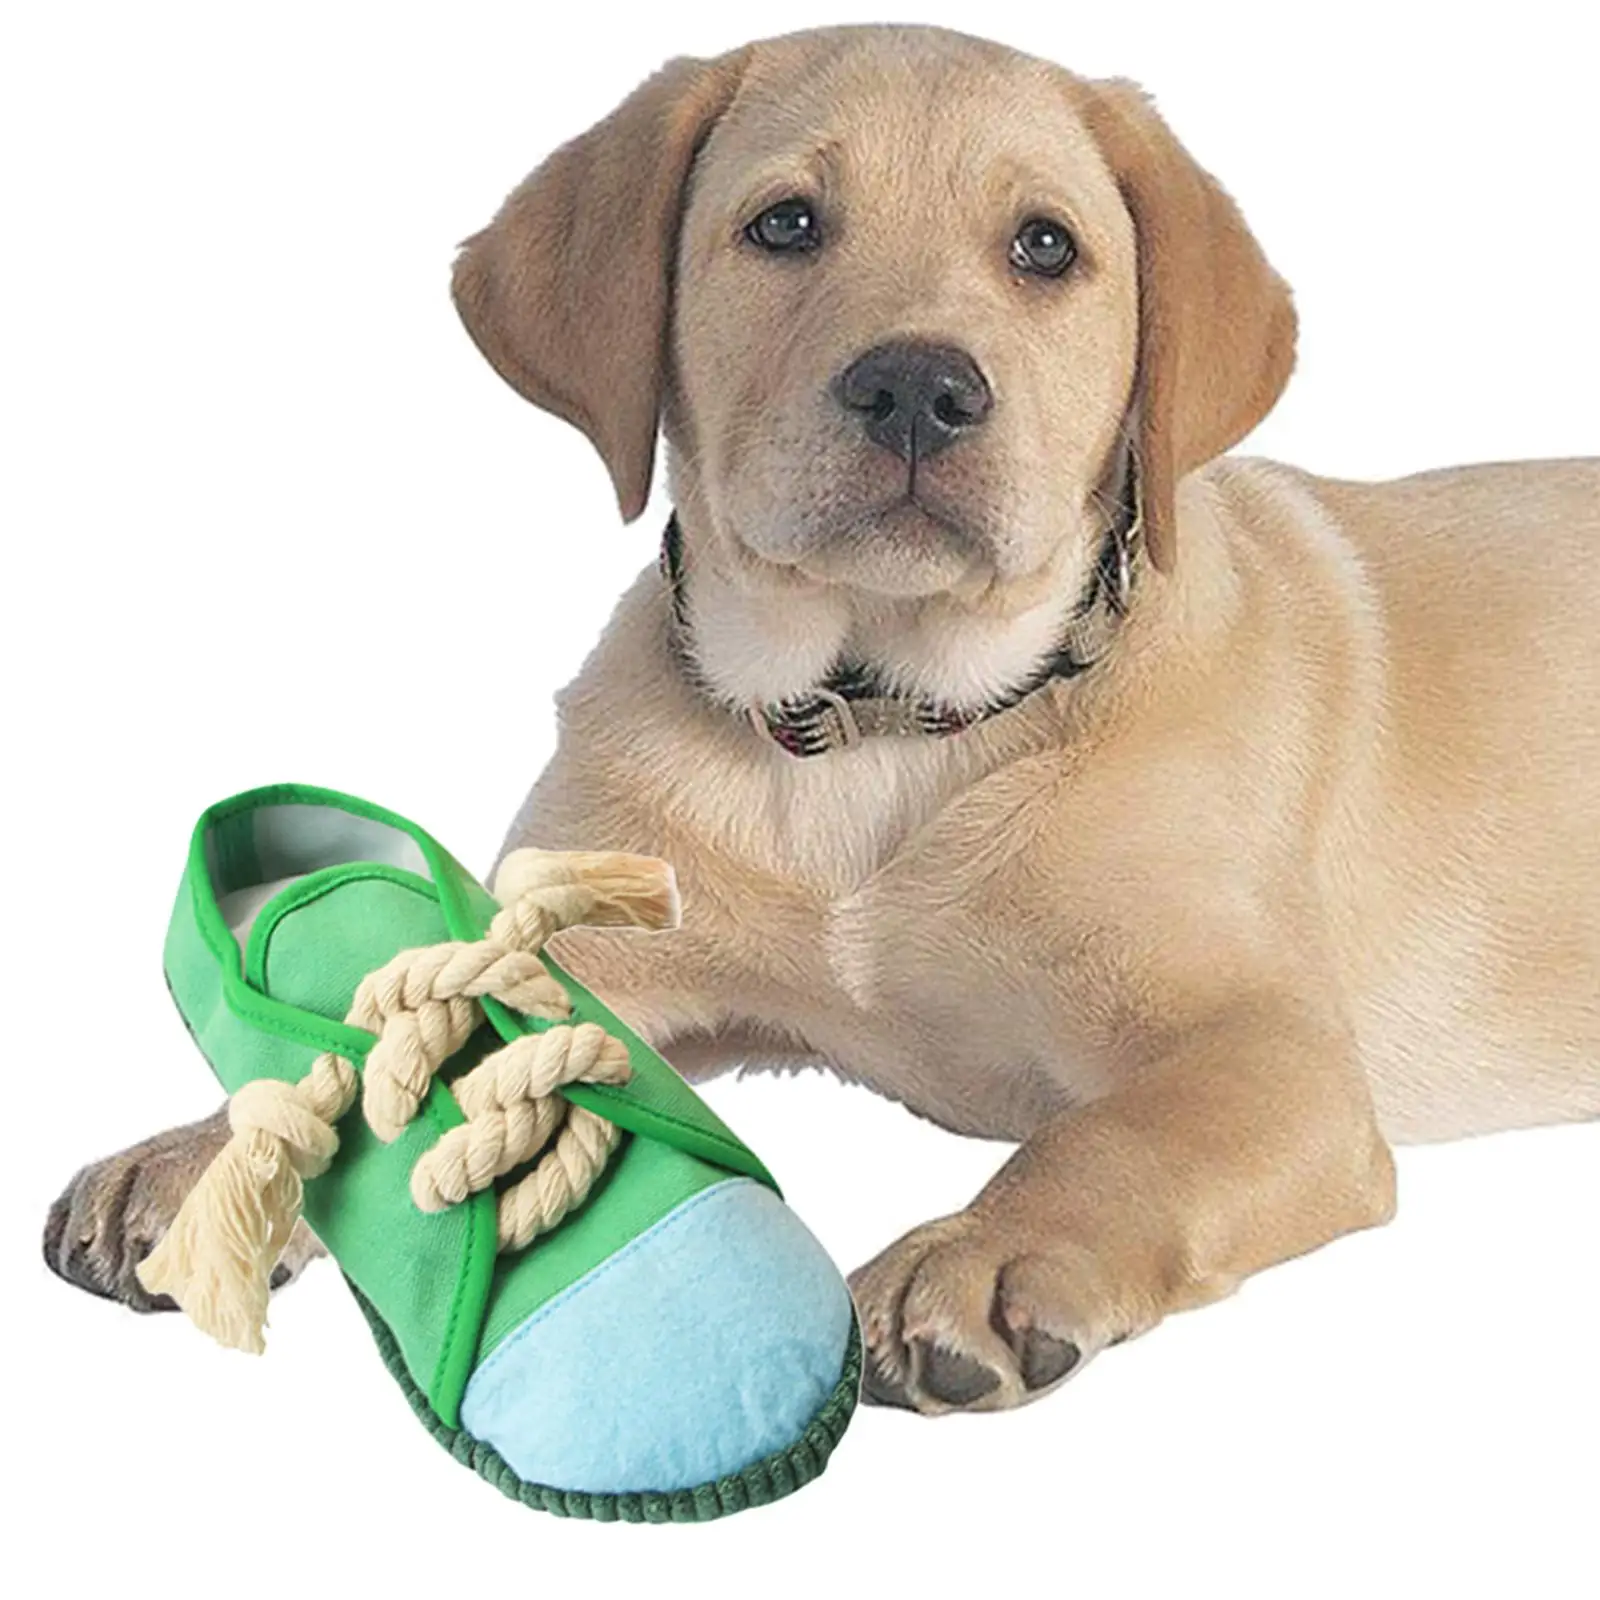 Shoes Shape Dog Chew Toy Dog Squeaky Toy Accessory Interactive Size 25x10cm